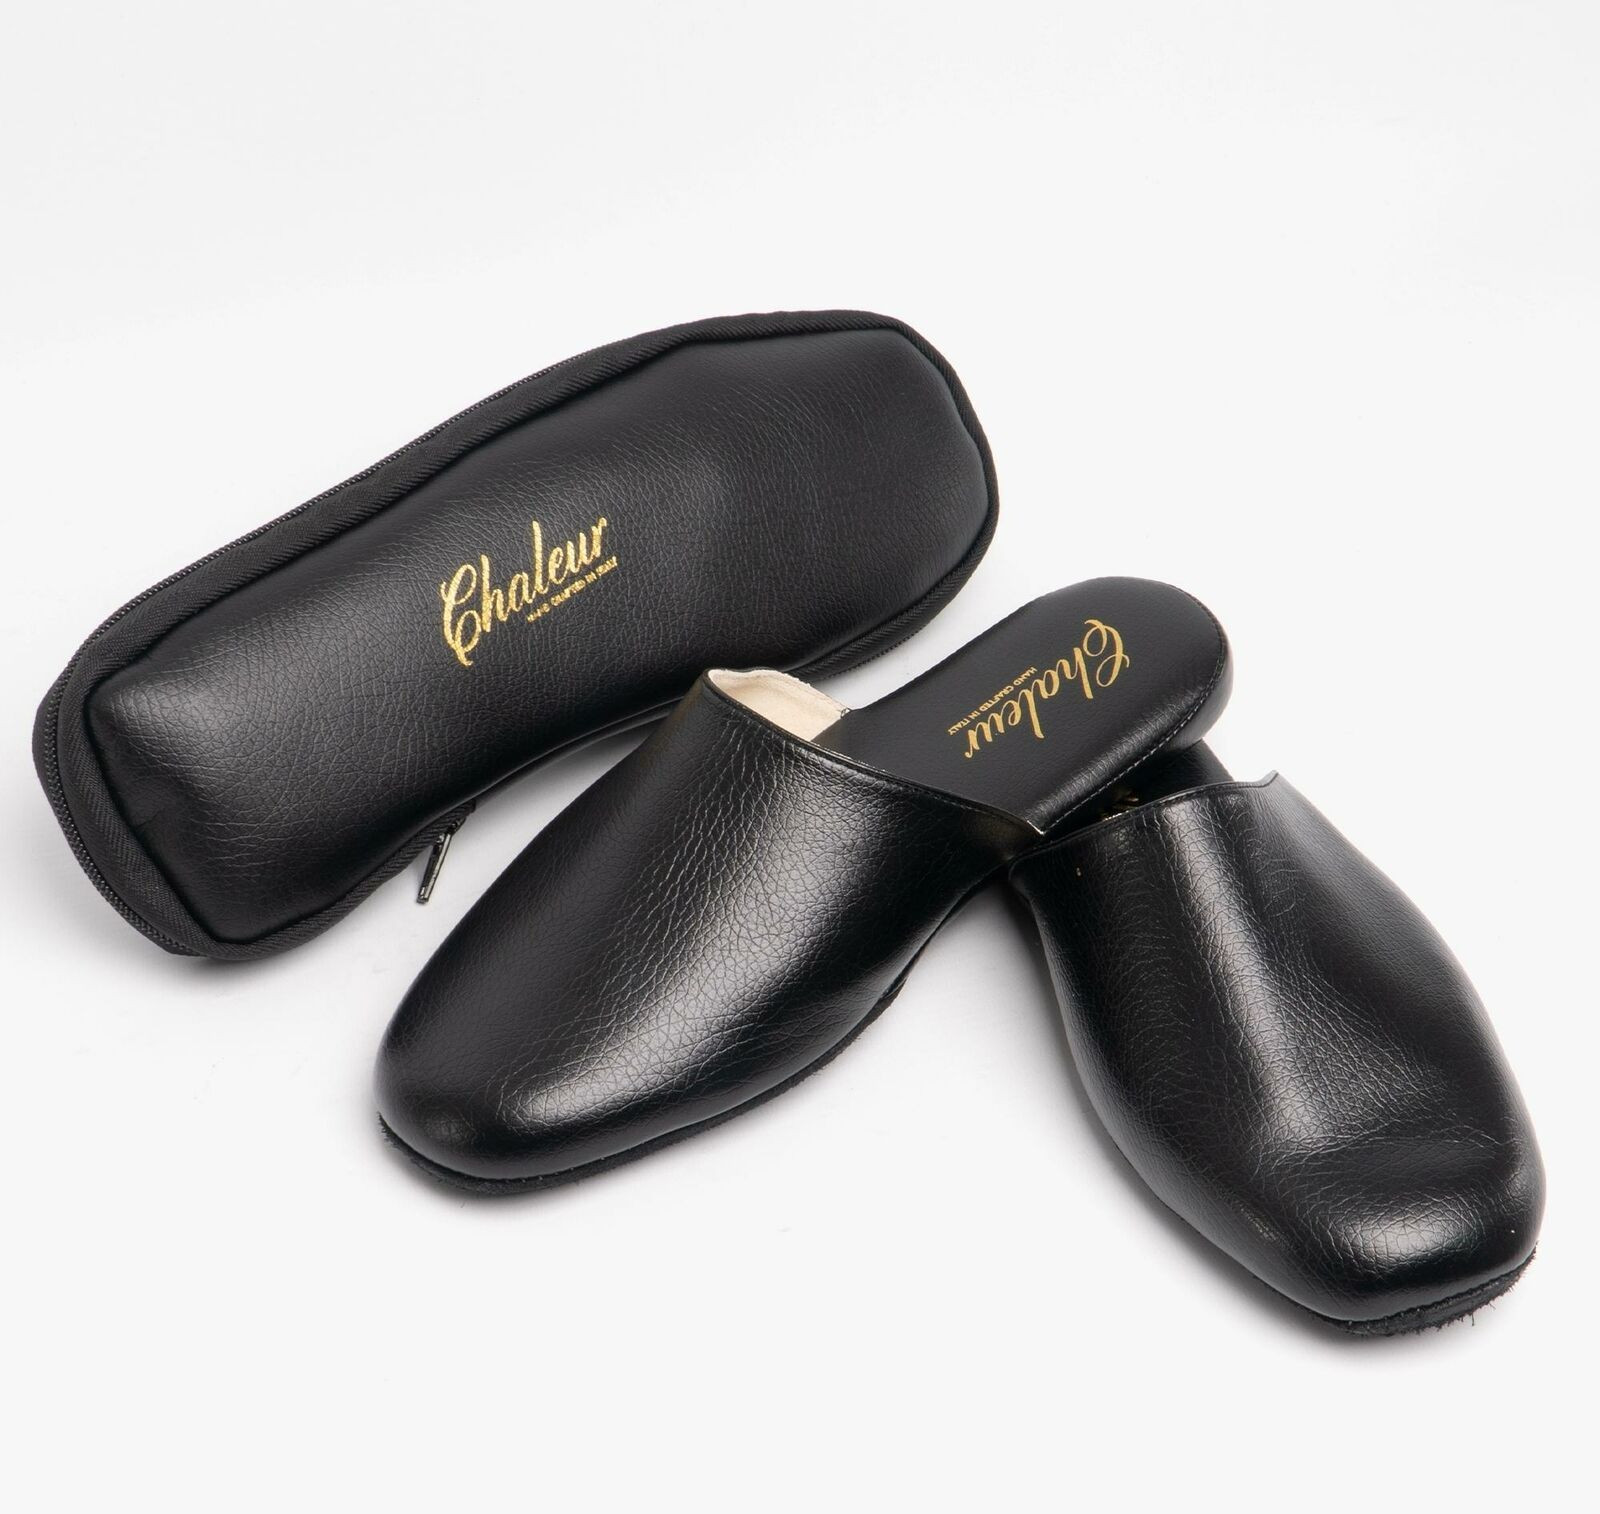 Mens Leather Bedroom Slippers
 Details about Chaleur MATTEO Mens MADE IN ITALY Leather